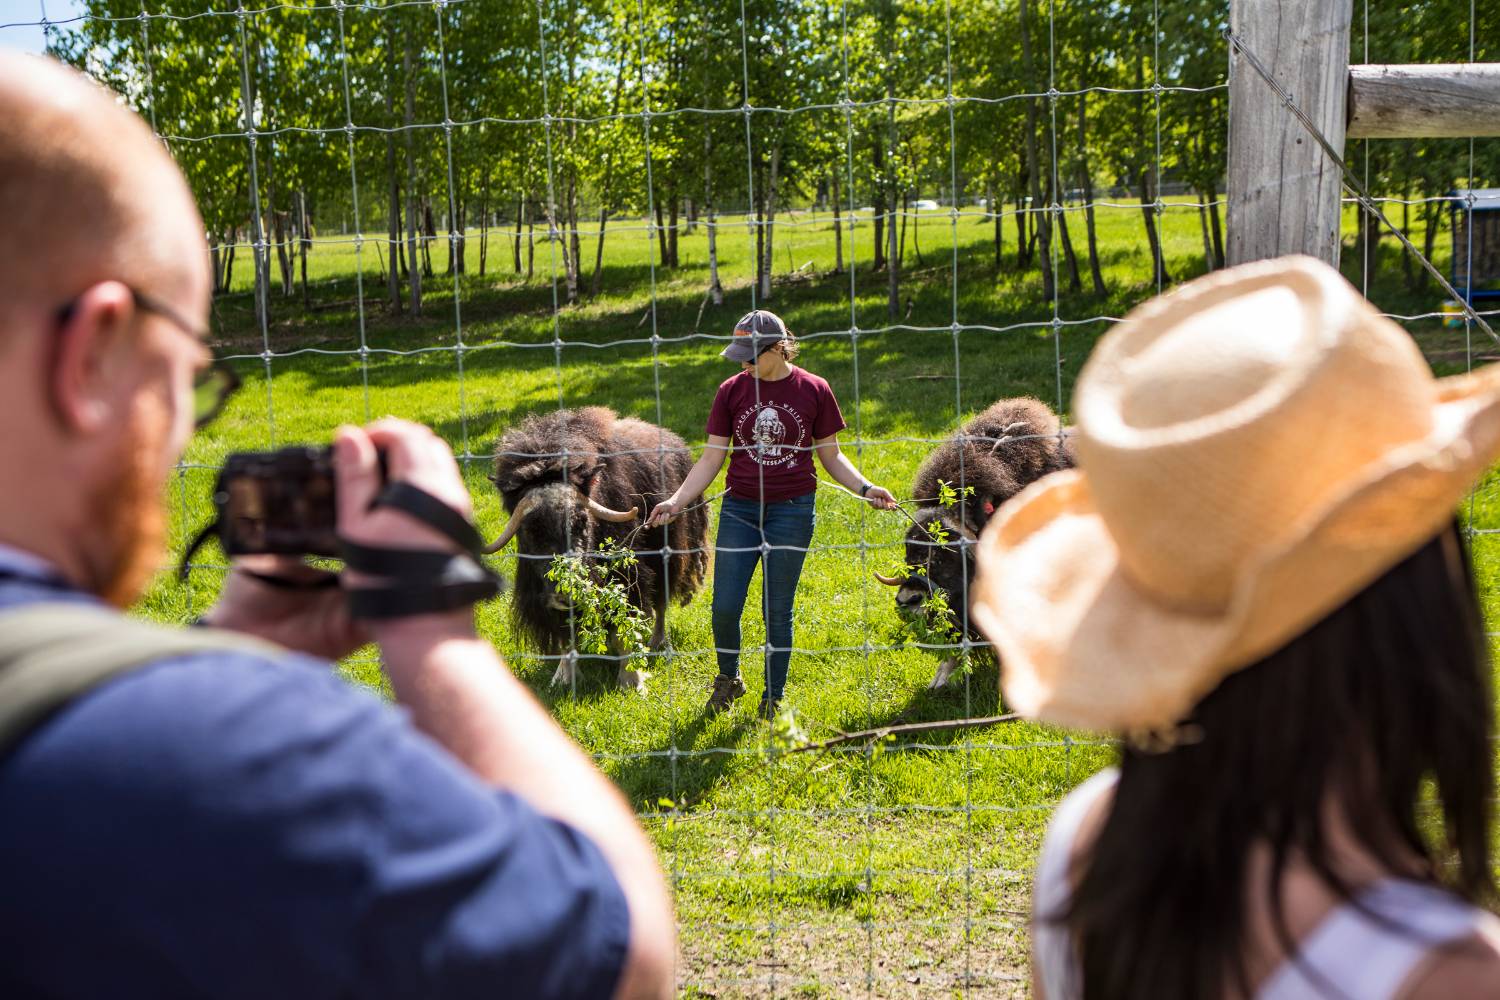 A guide feeds muskoxen treats while answering visitors' questions. 